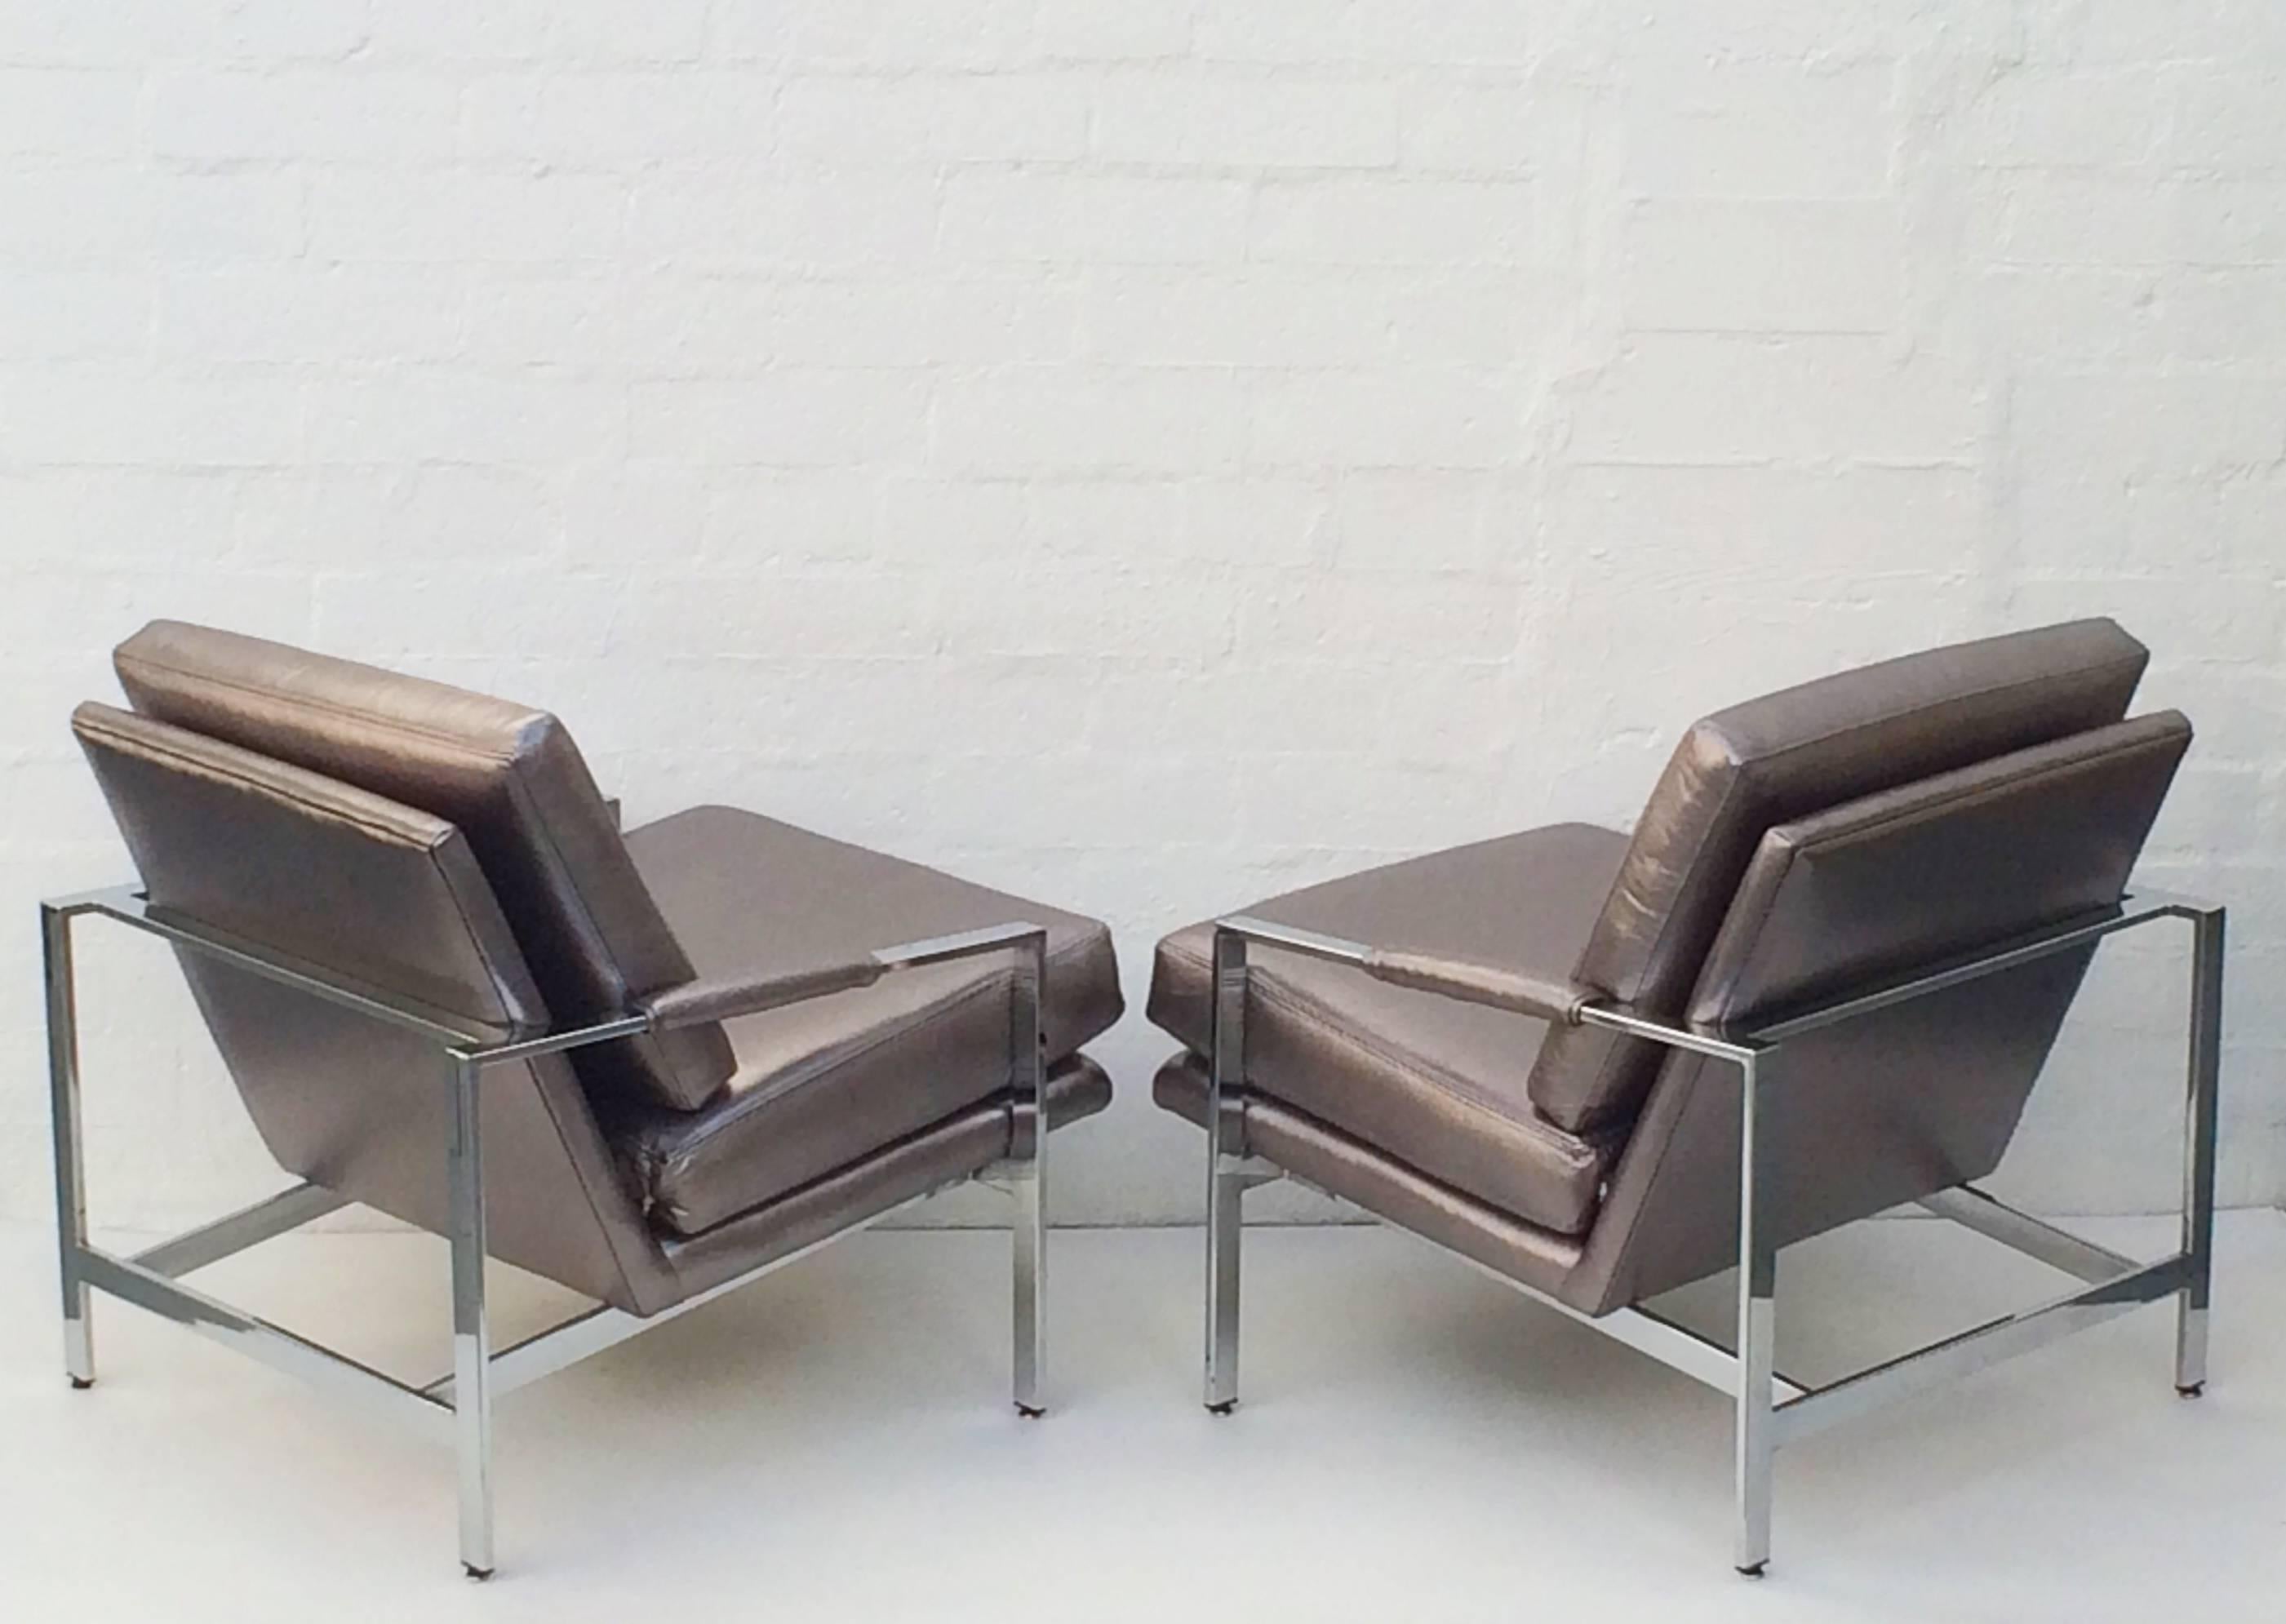 Beautiful pair of chrome and leather lounge chairs design by Milo Baughman for Thayer Coggin in the 1960s.
The frames are in excellent condition. They have been newly reupholstered in this beautiful metallic-antracite gray soft leather. One of the